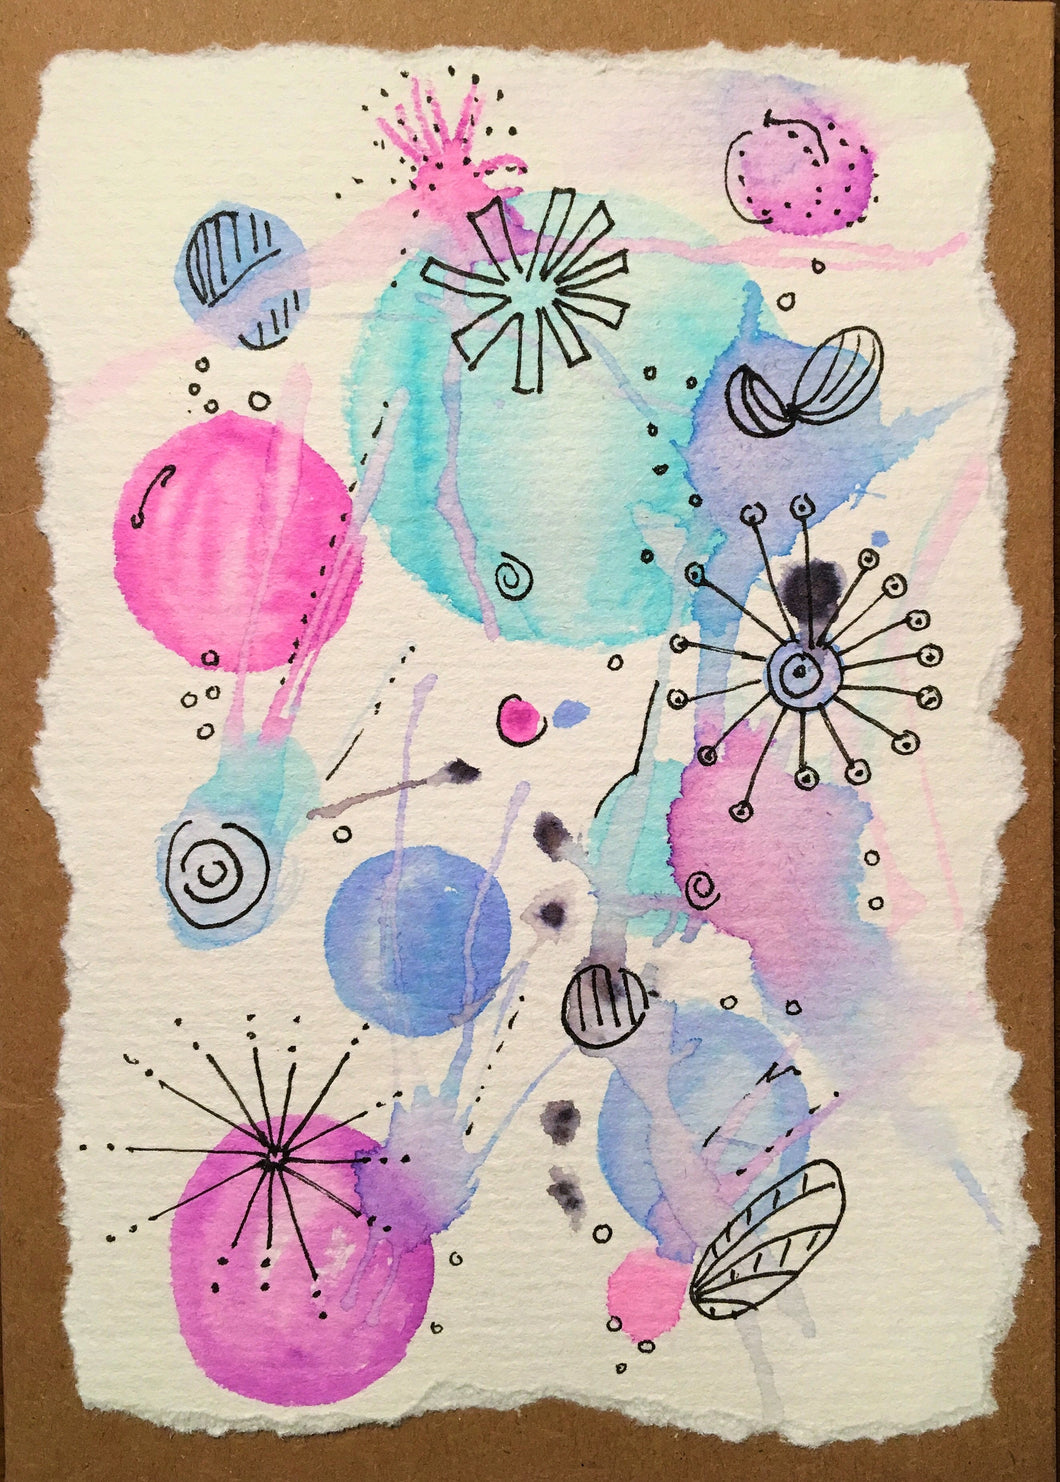 Handpainted Watercolour Greeting Card - Abstract Ink Design Pink/Purple/Turquoise Splatter - eDgE dEsiGn London